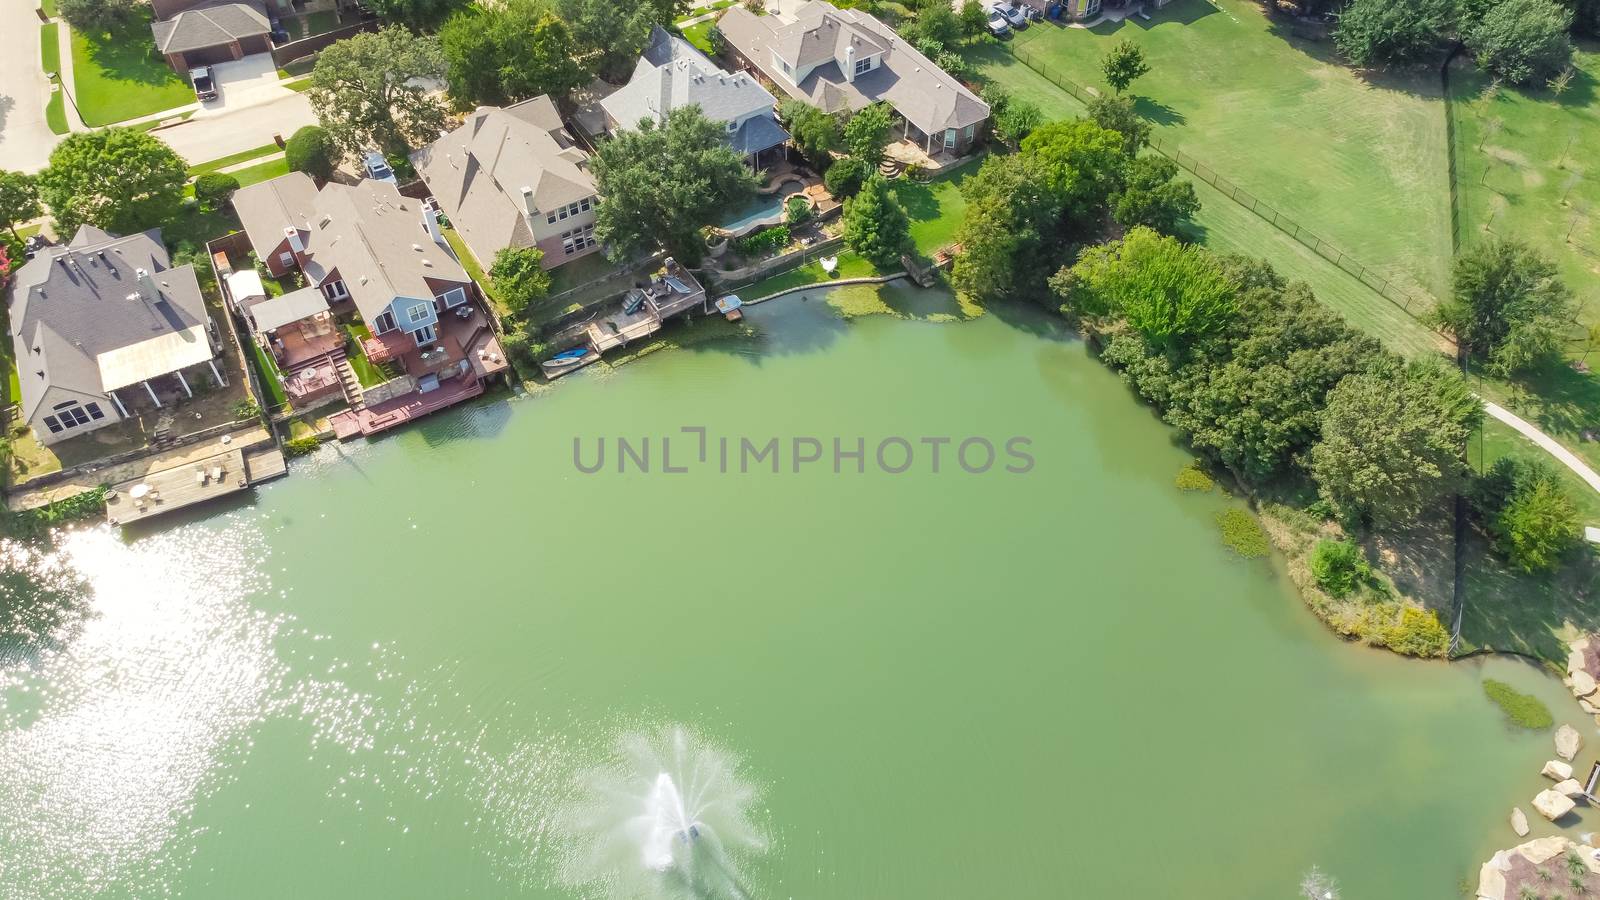 Flyover waterfront and park side houses with lake fountain in sunny day near Dallas, Texas, USA by trongnguyen